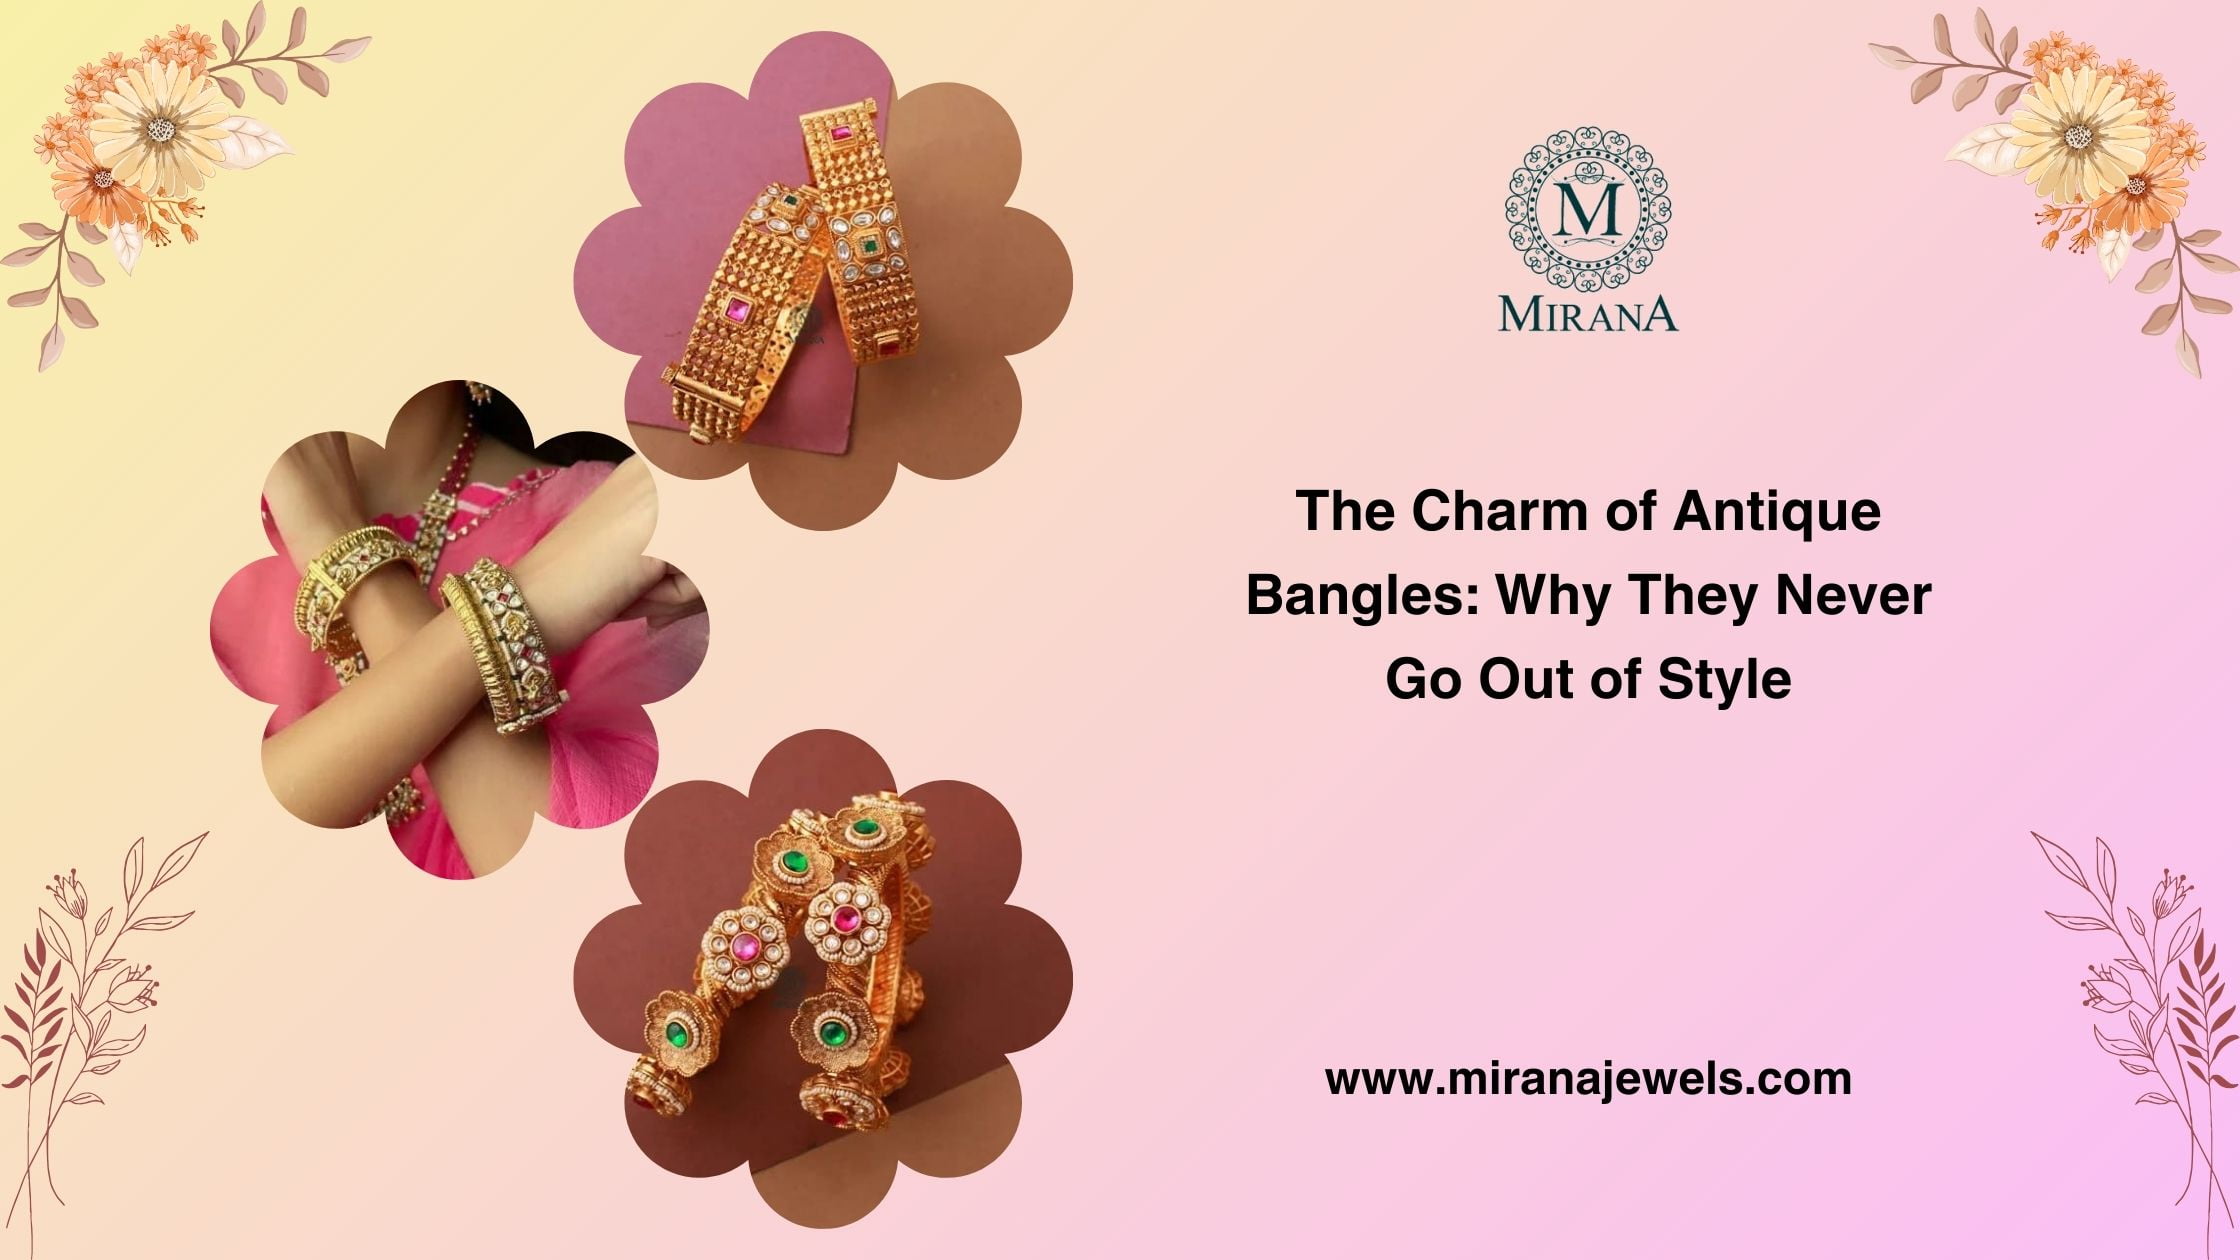 The Charm of Antique Bangles: Why They Never Go Out of Style